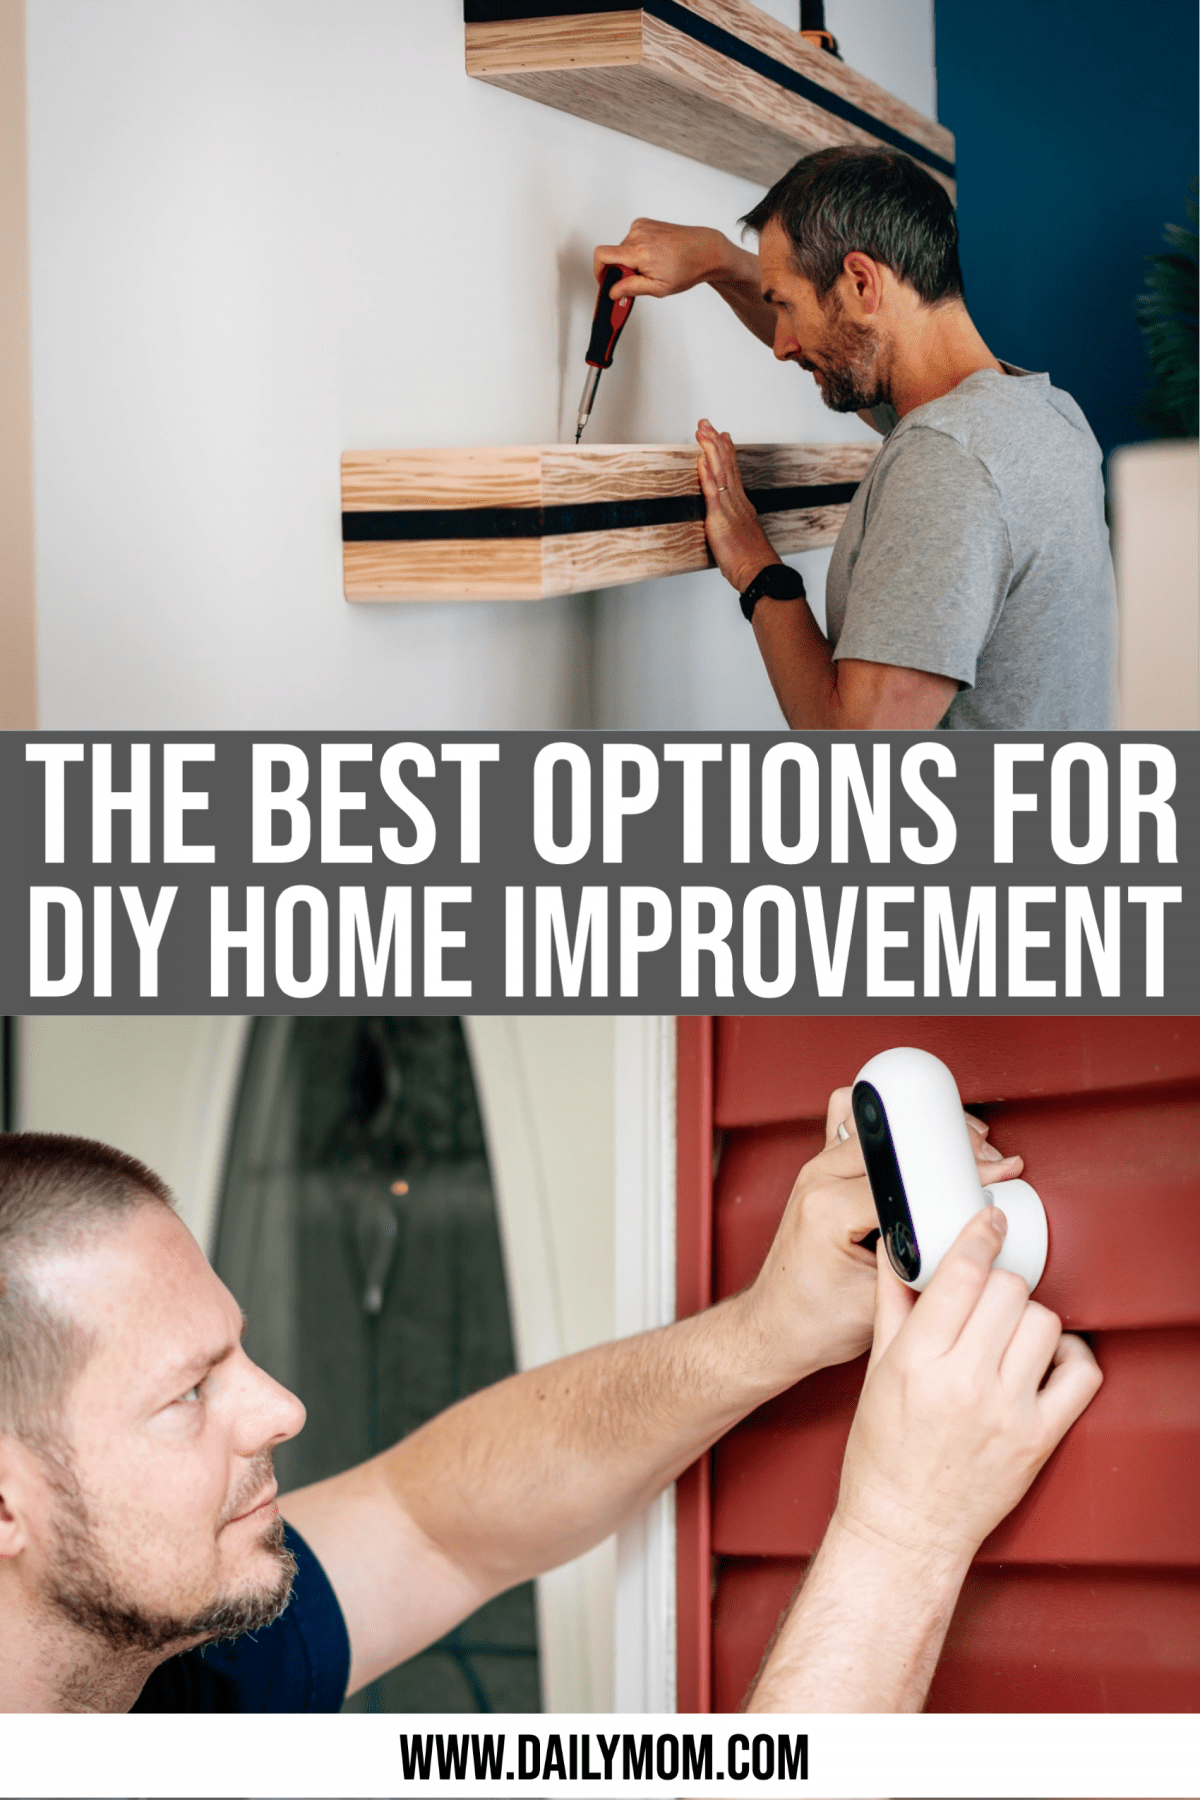 6 DIY Sites for the BEST Home Improvement Advice from DIY Experts